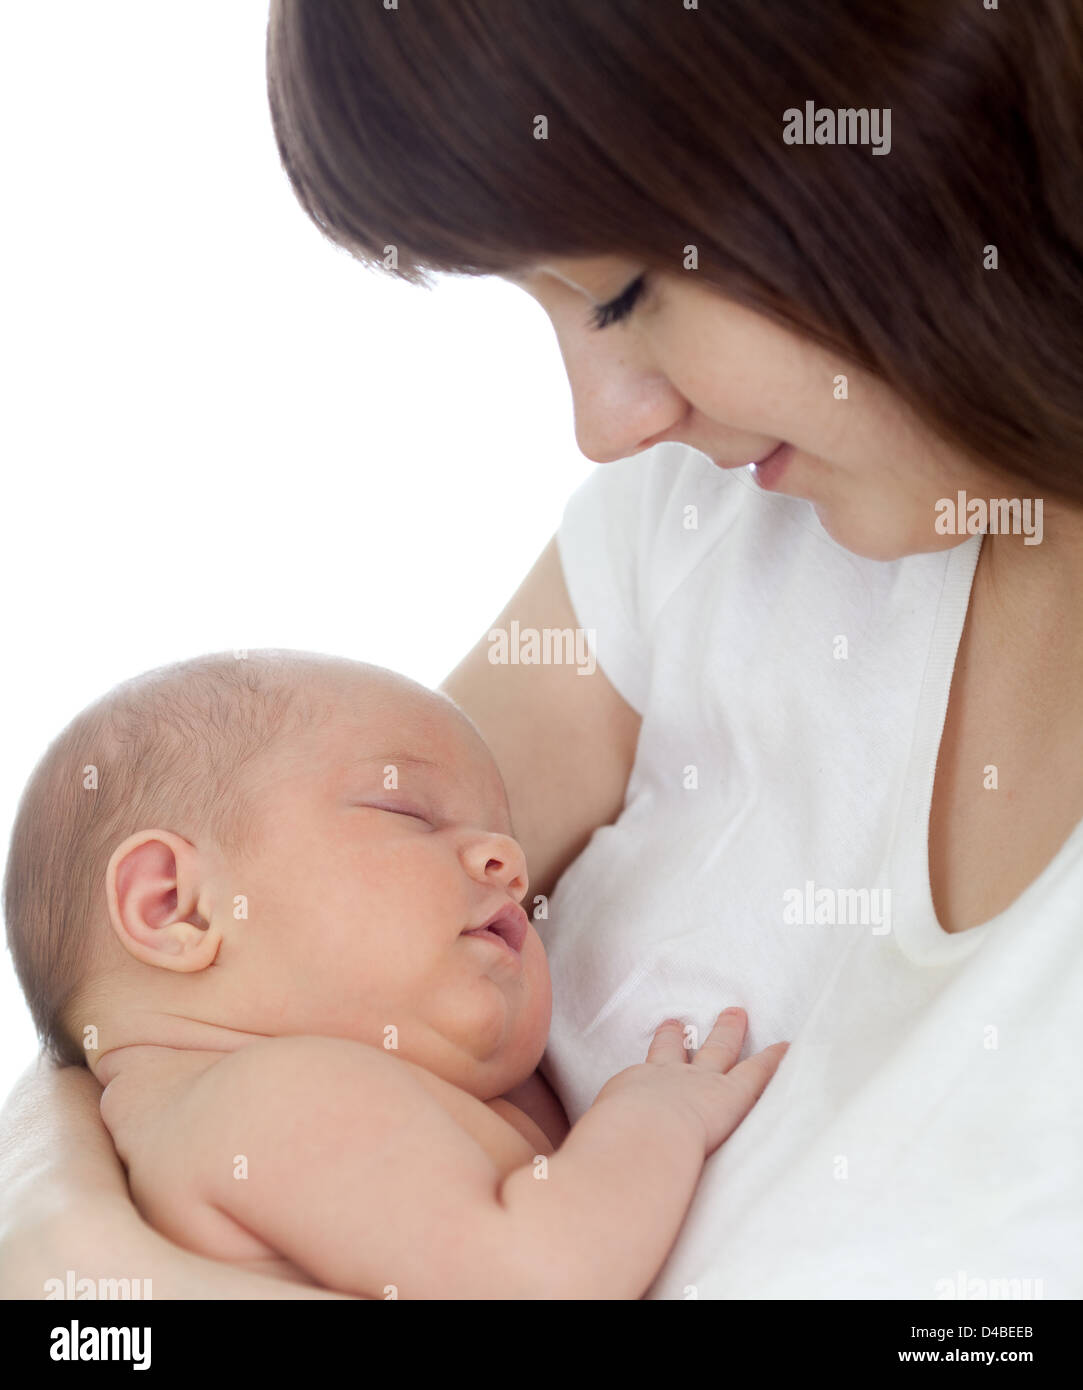 Close-up young mother holding her newborn baby isolated on white background. Focus on child. Stock Photo